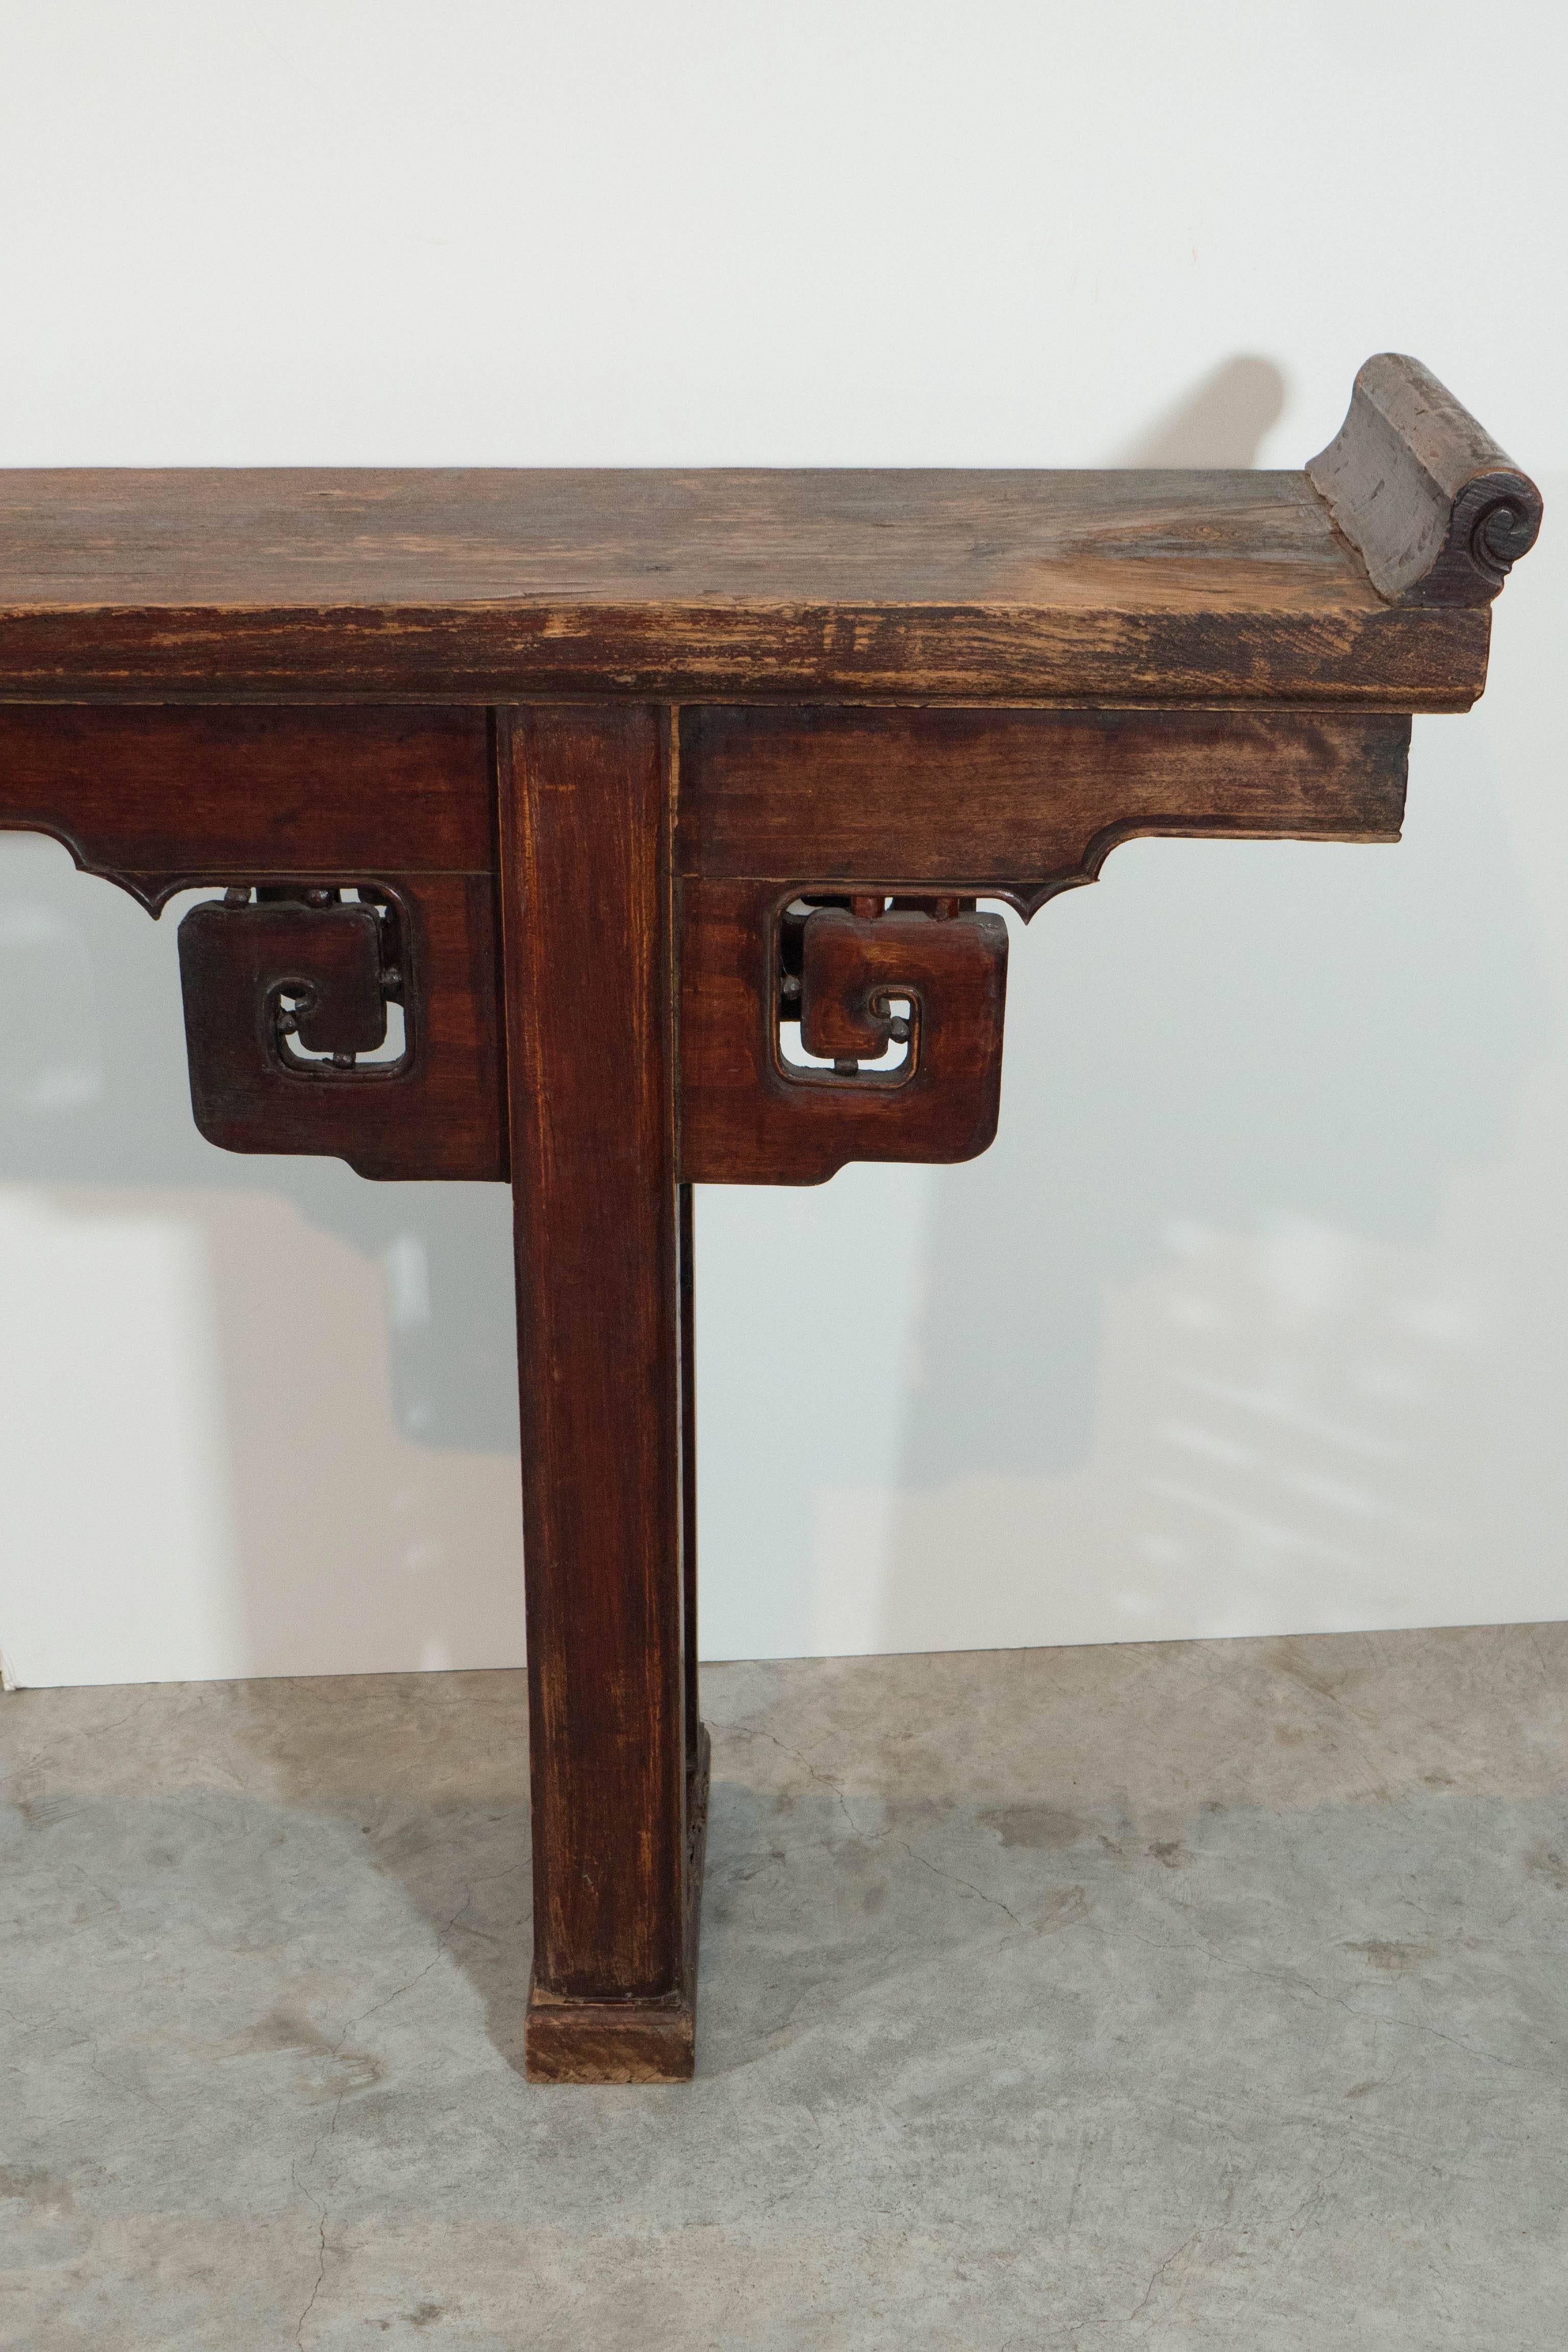 A solid antique Chinese altar table with thick elm top, beautiful patina and artfully carved legs from Shanxi Province, circa 1850.

T557.